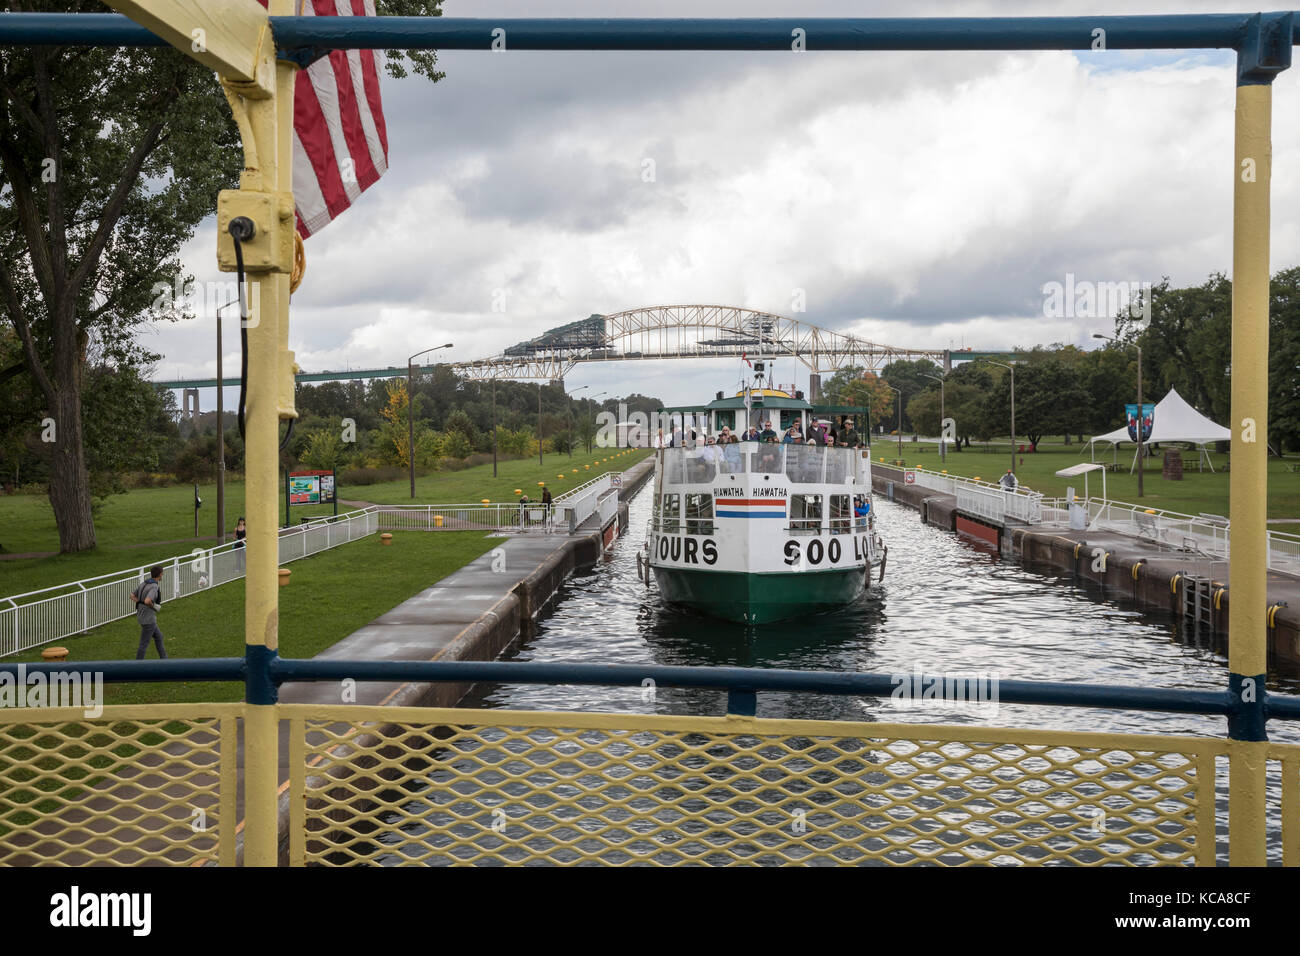 Sault Ste Marie, Ontario Canada - Tourists on a boat tour of the Soo Locks as the boat passes through the Canadian lock. The small Canadian lock is us Stock Photo